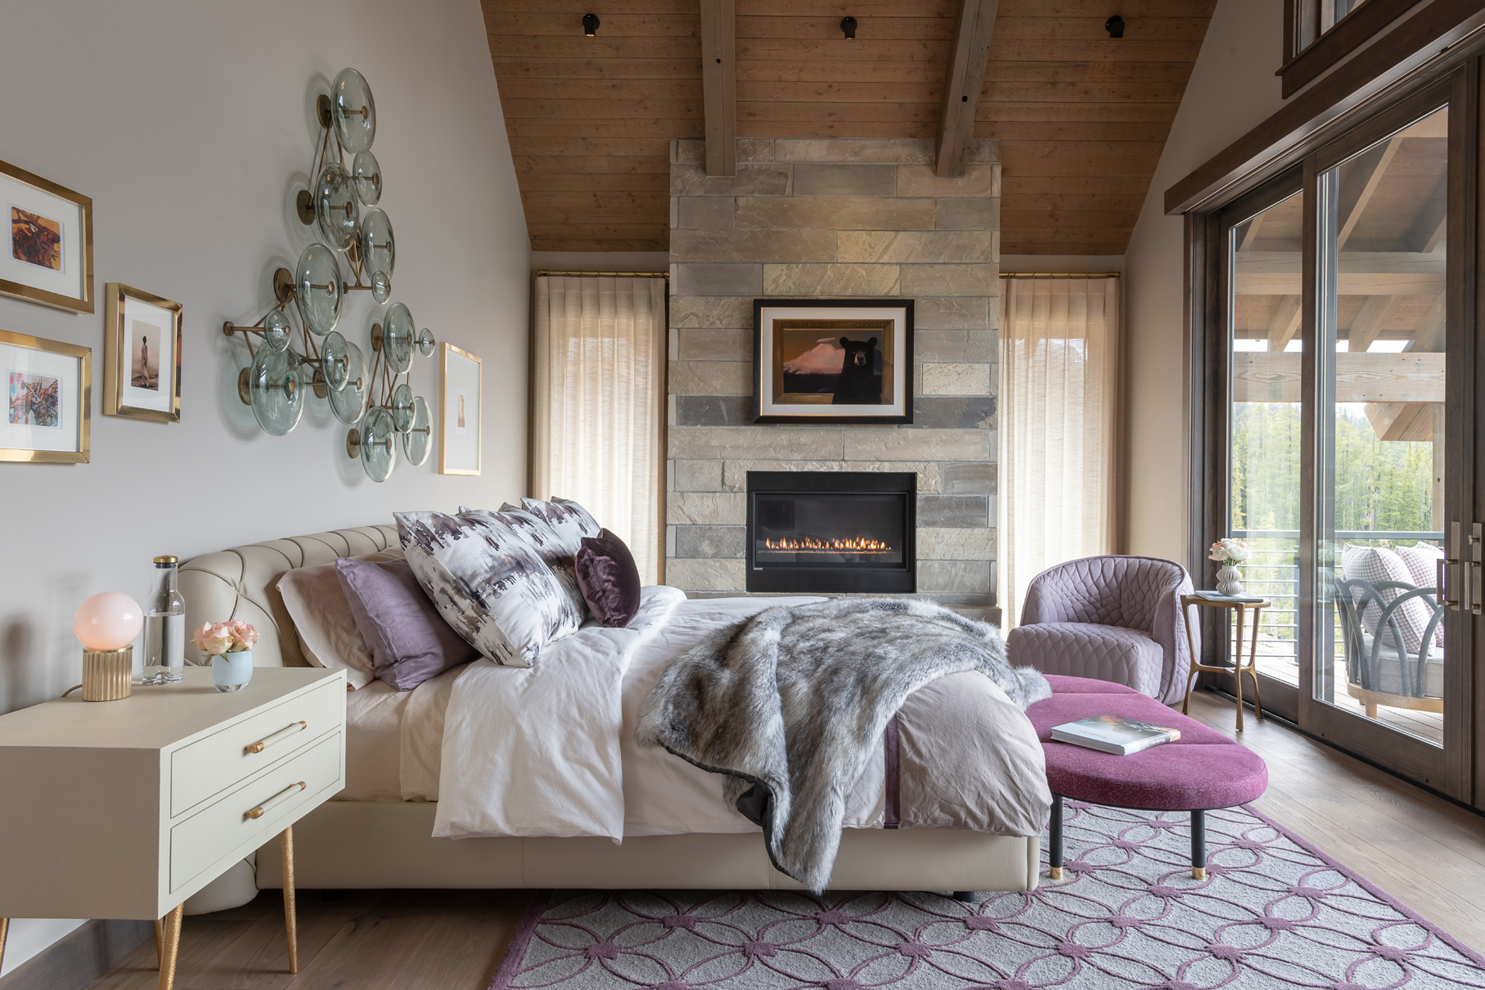 The favorite color of an Envi Interior Design Studio client informs this luxe primary bedroom in the Yellowstone Club that is focused on the mountain views (PC: Audrey Hall).